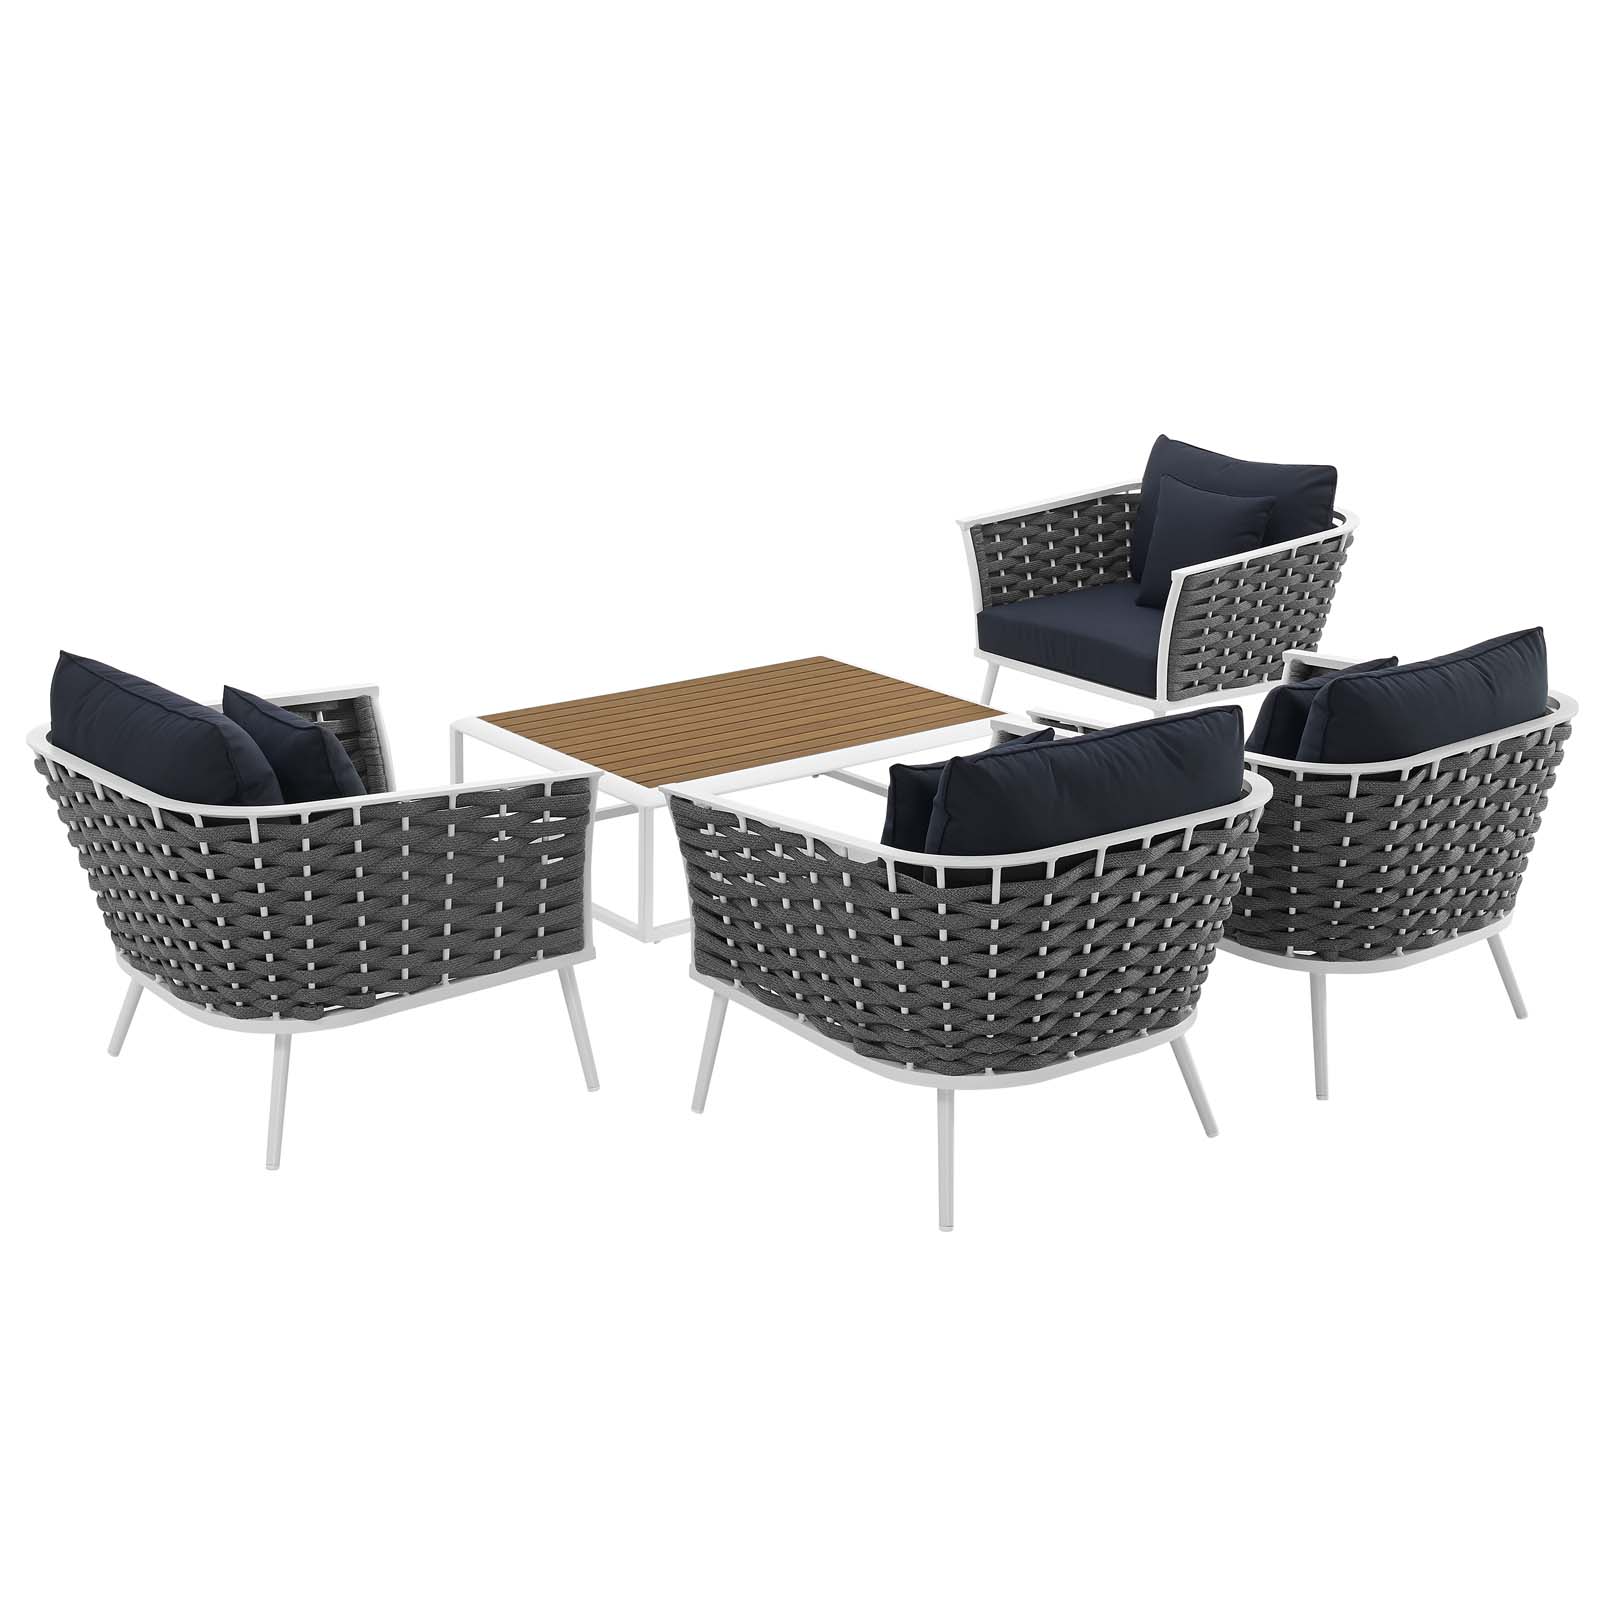 Modway Stance 5 Piece Outdoor Patio Aluminum Sectional Sofa Set in White Navy - image 3 of 8